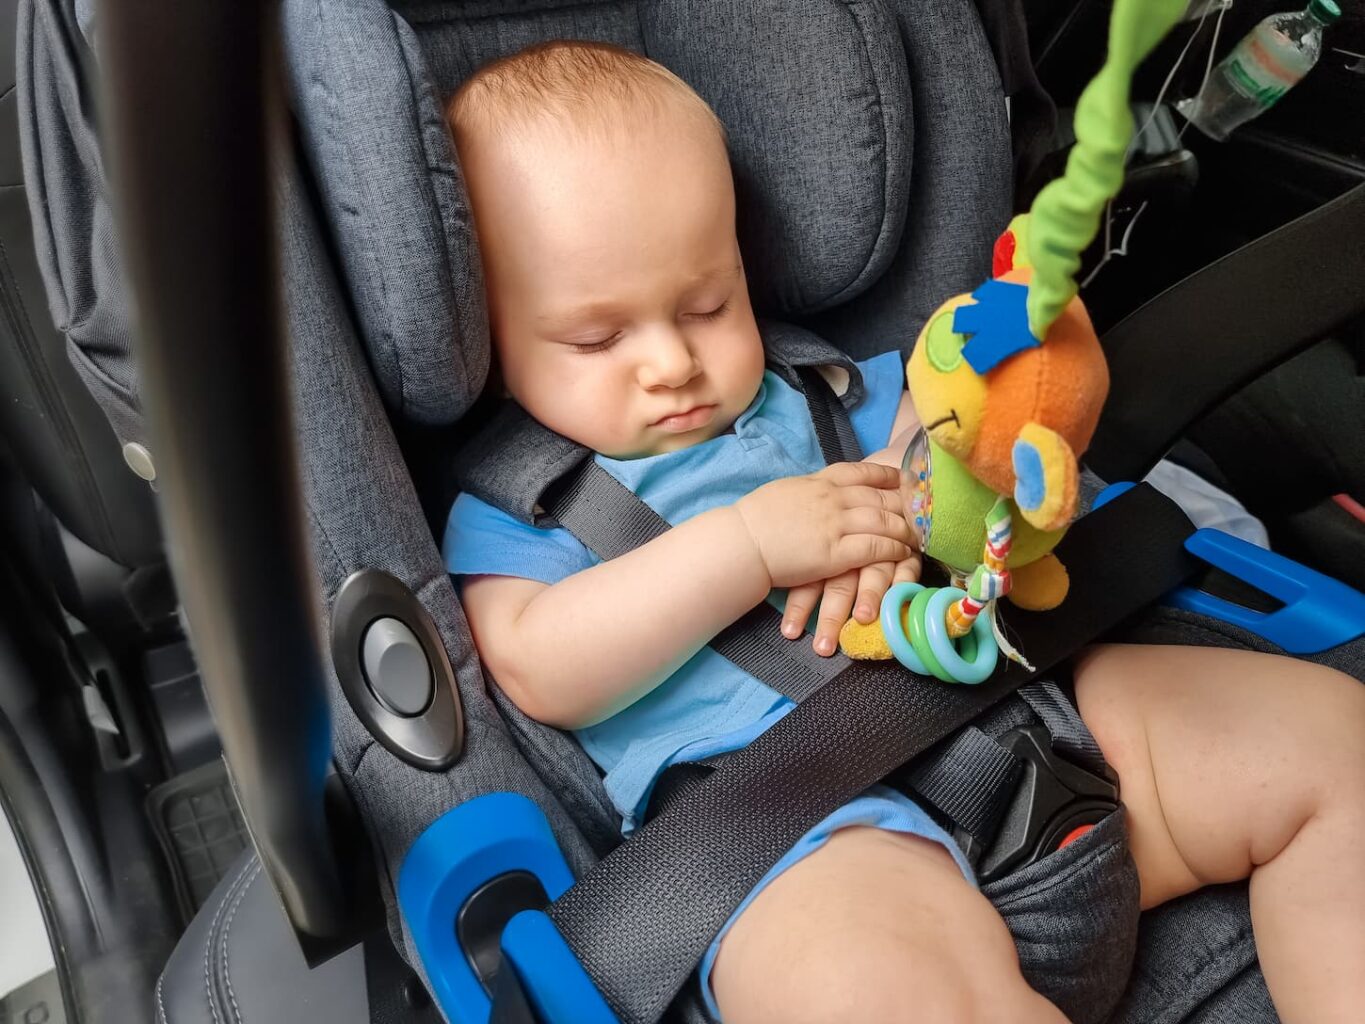 An image of a baby boy sleeping in the safety seat of a car and next to his toy.